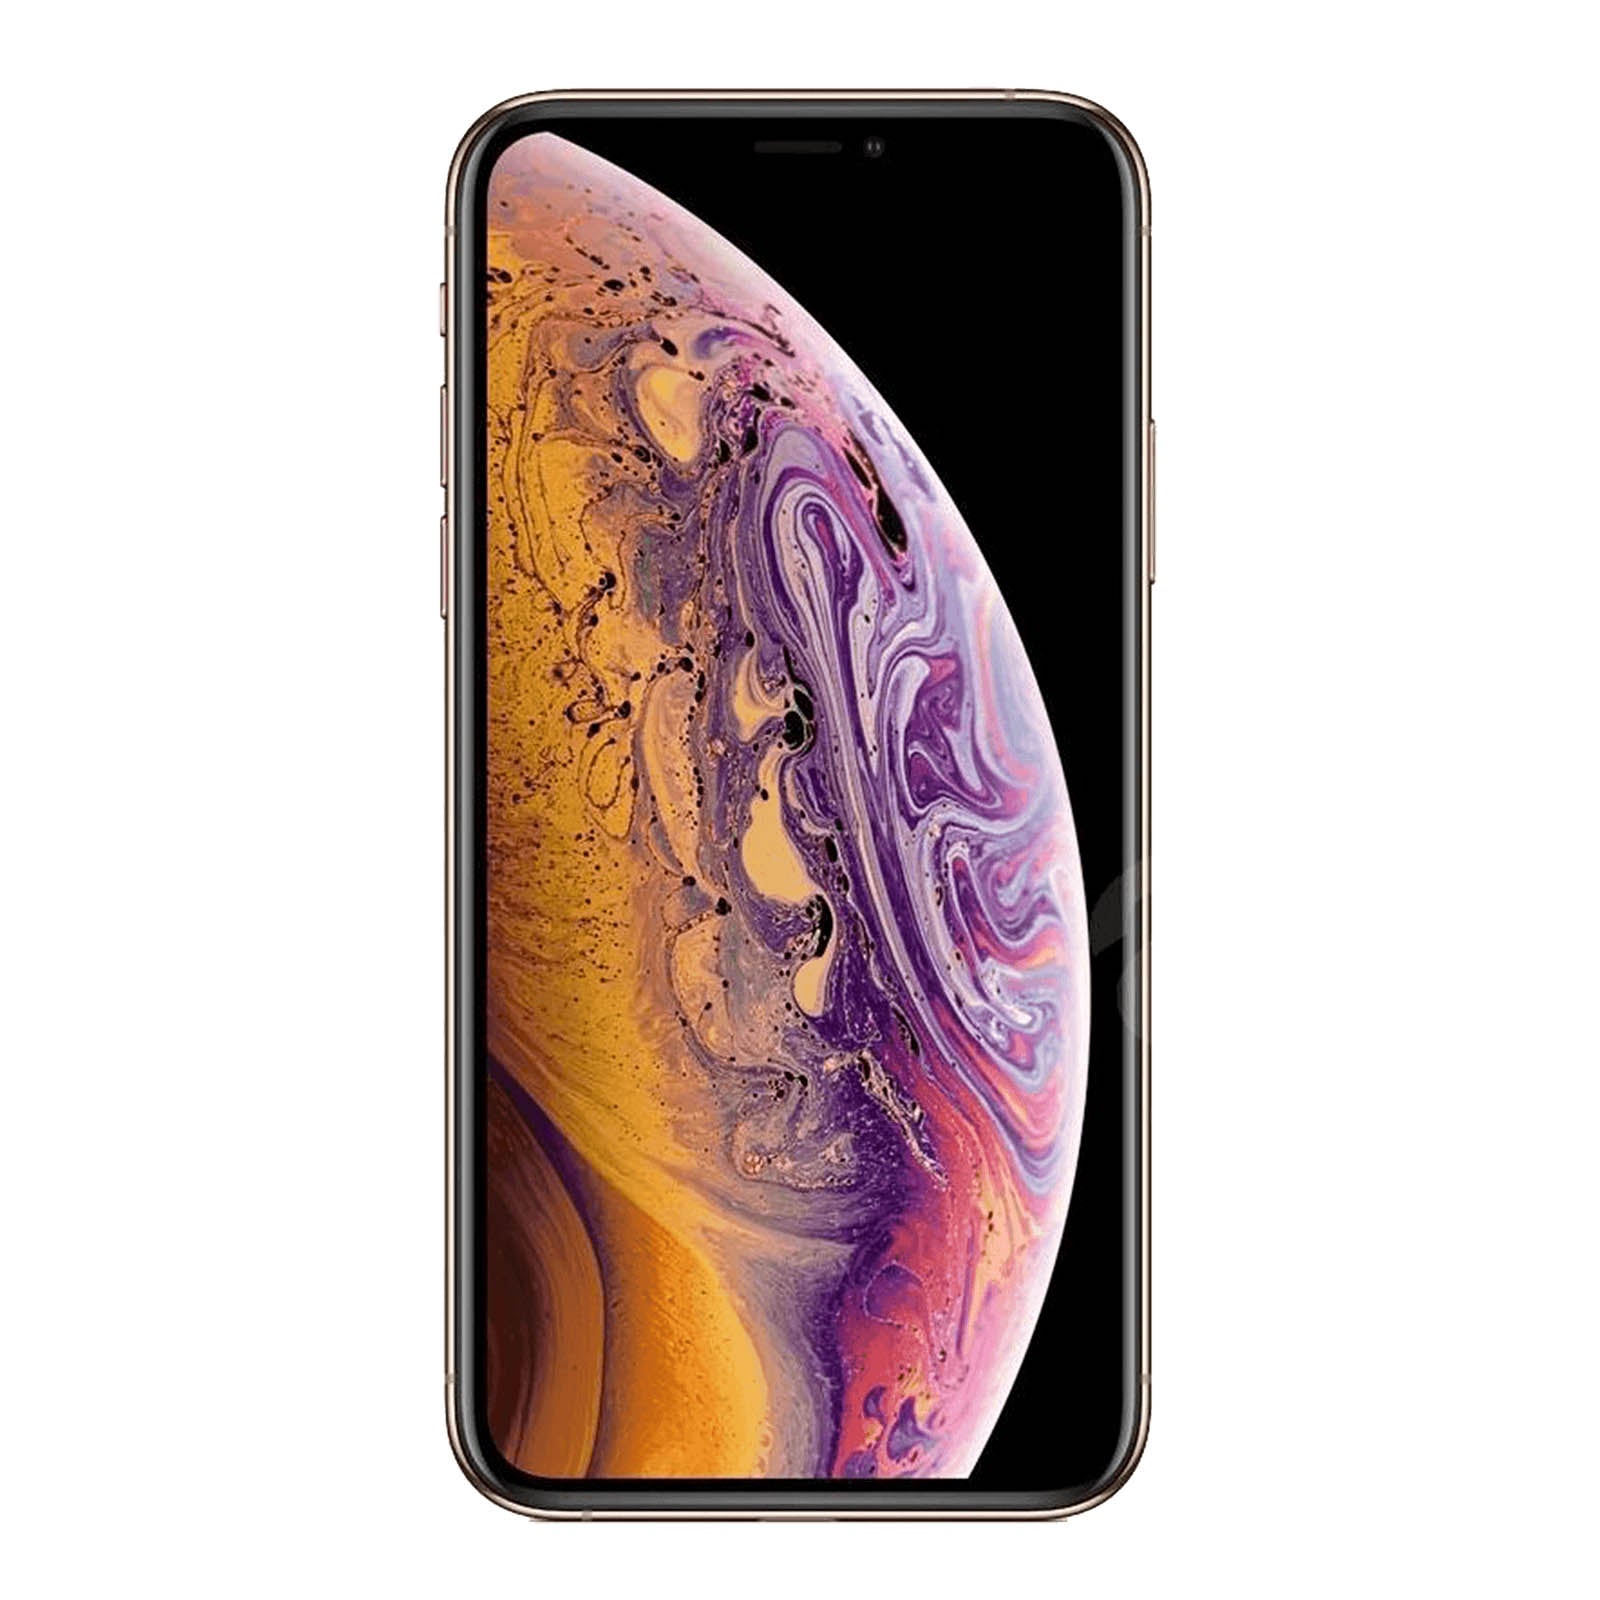 Apple iPhone XS 256GB Gold Very Good - AT&T